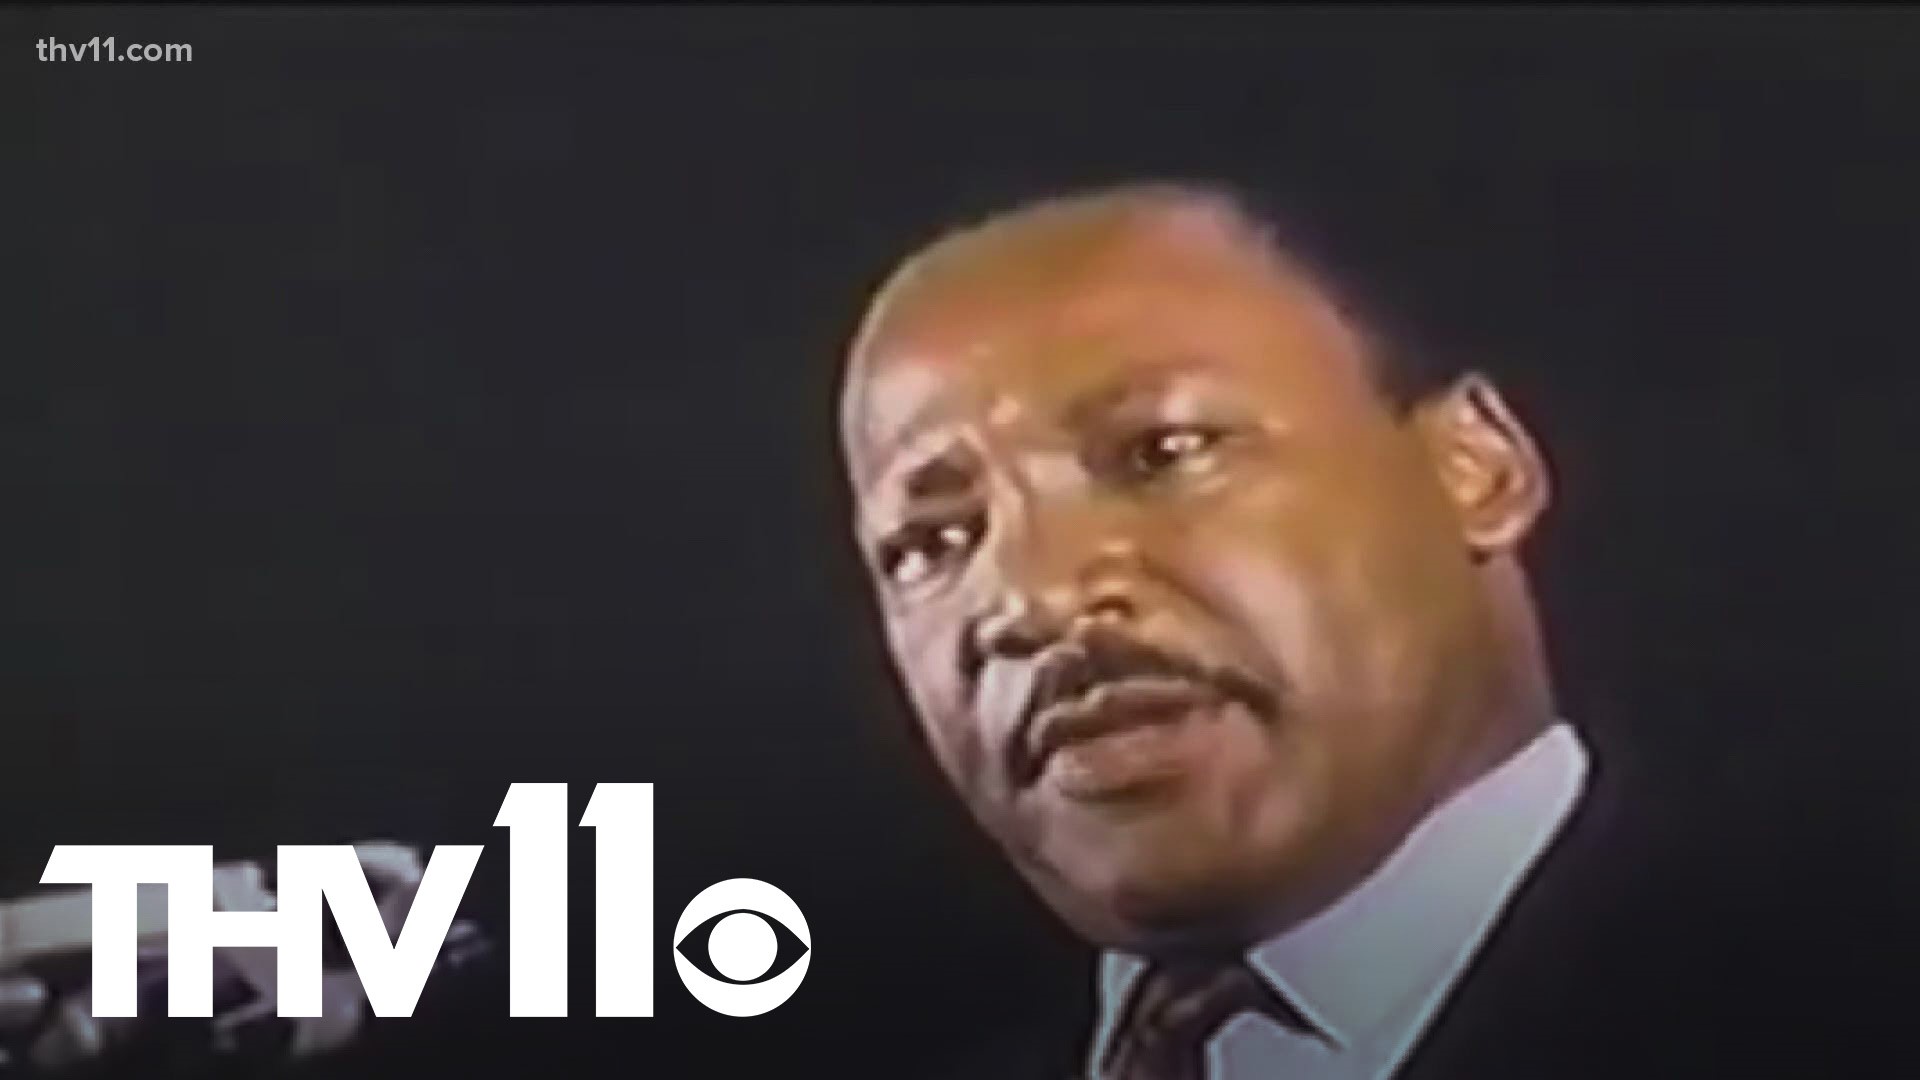 The pandemic won't stop the MLK Commission from celebrating Dr. King's life.